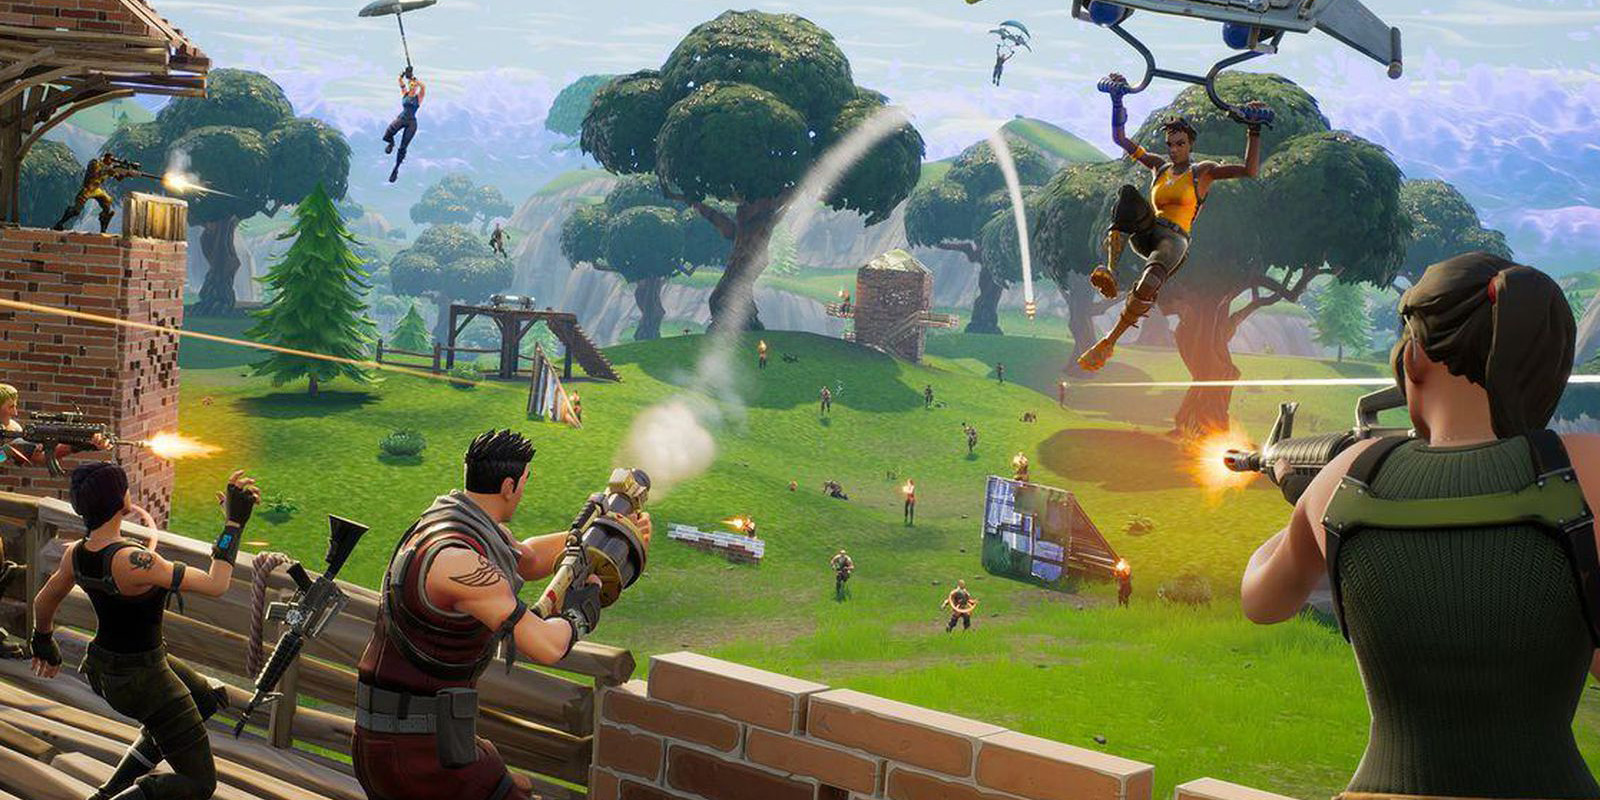 HOW TO PLAY FORTNITE ON INCOMPATIBLE ANDROID DEVICE